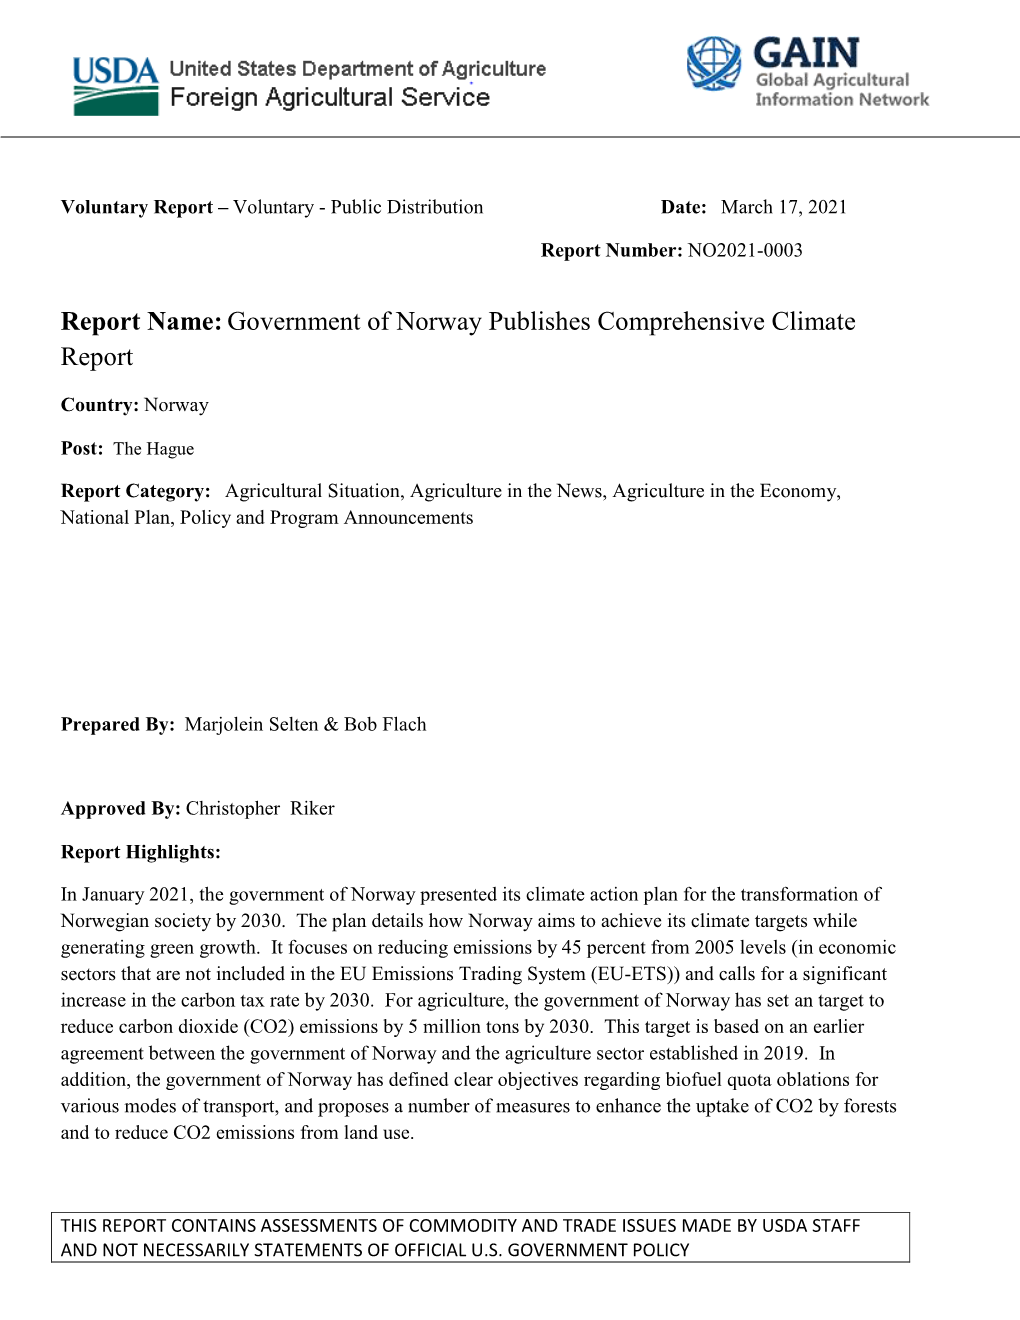 Government of Norway Publishes Comprehensive Climate Report